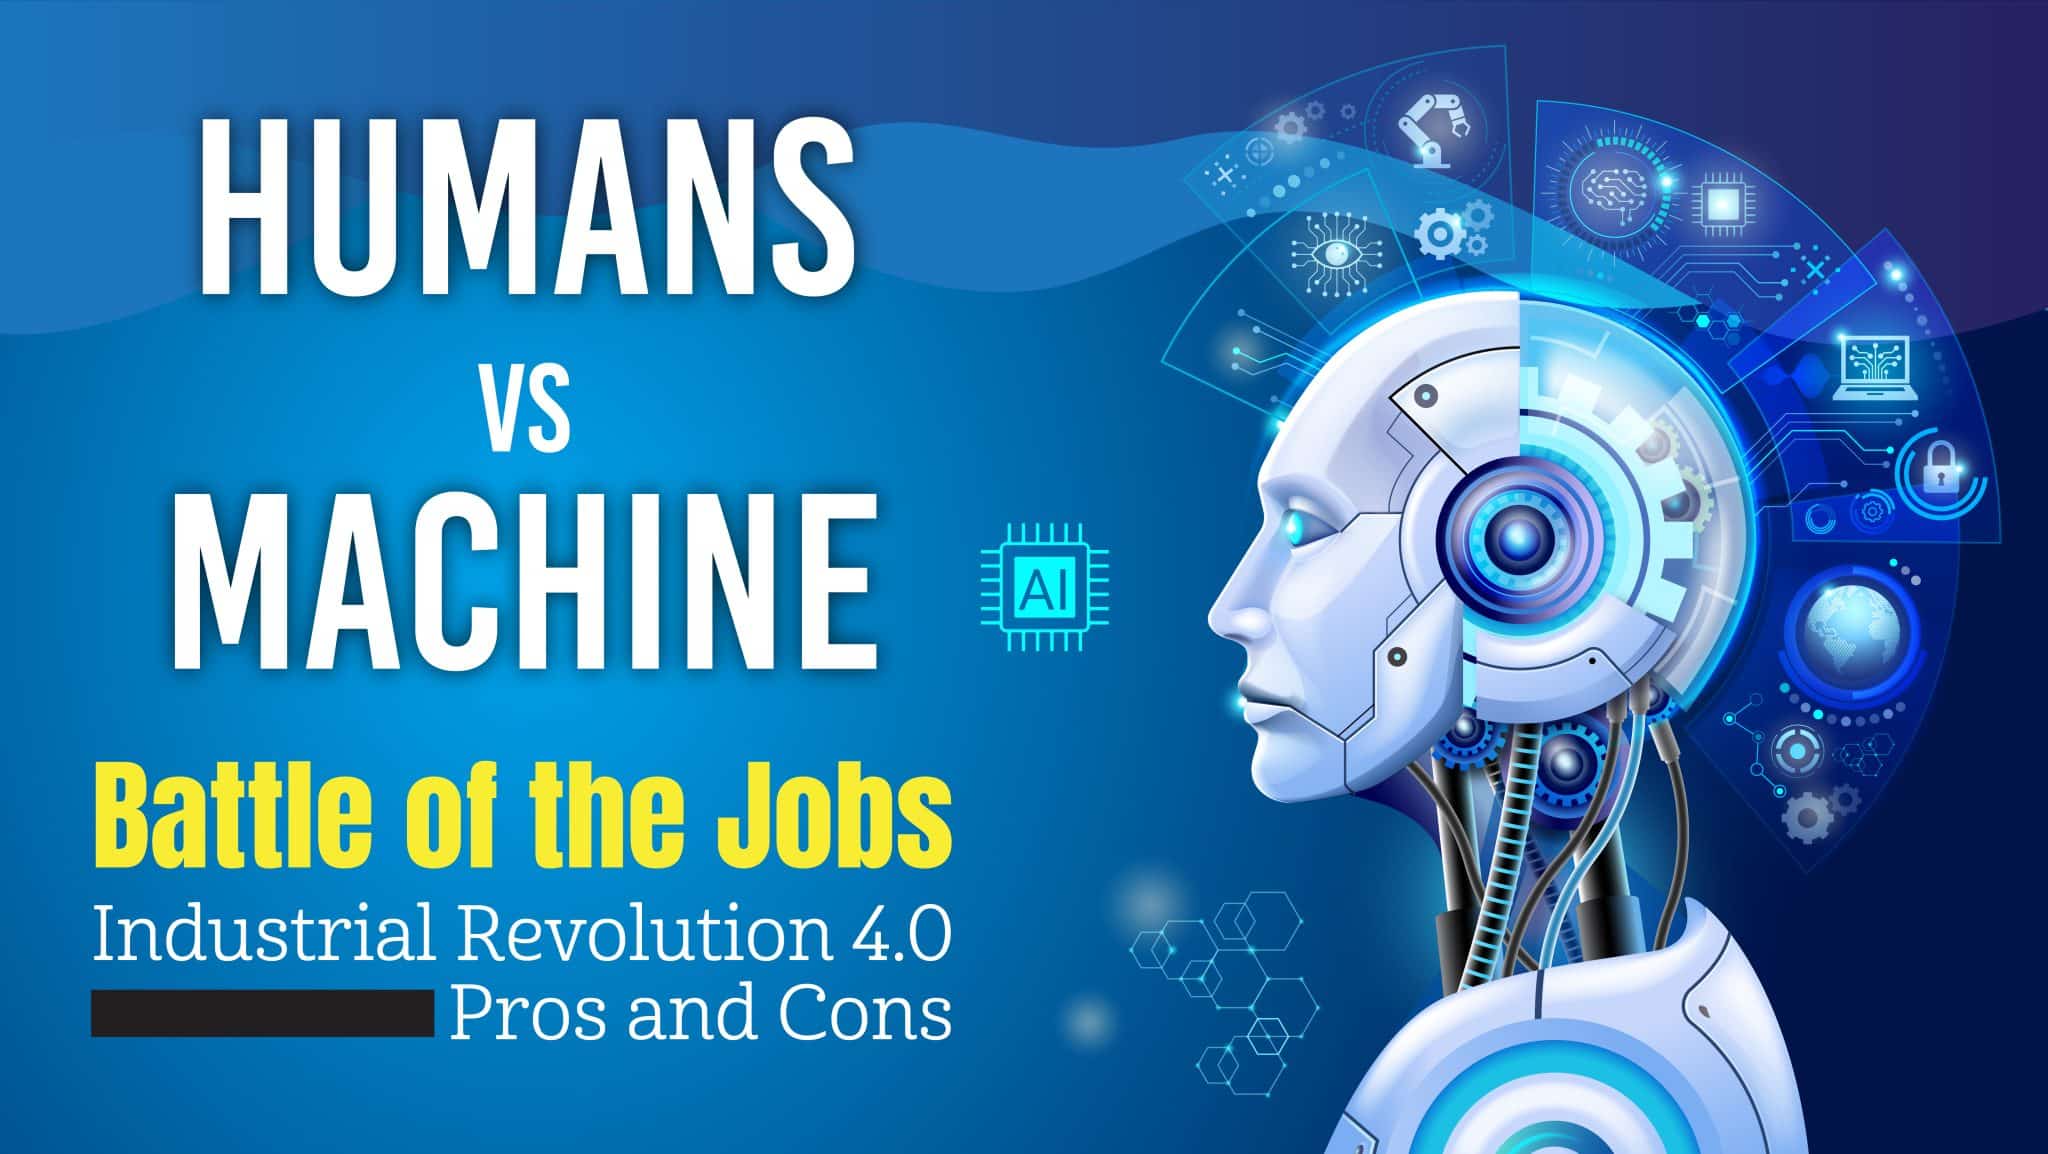 Humans Vs Machines Battle of the Jobs Industrial Revolution 4.0 Pros and Cons